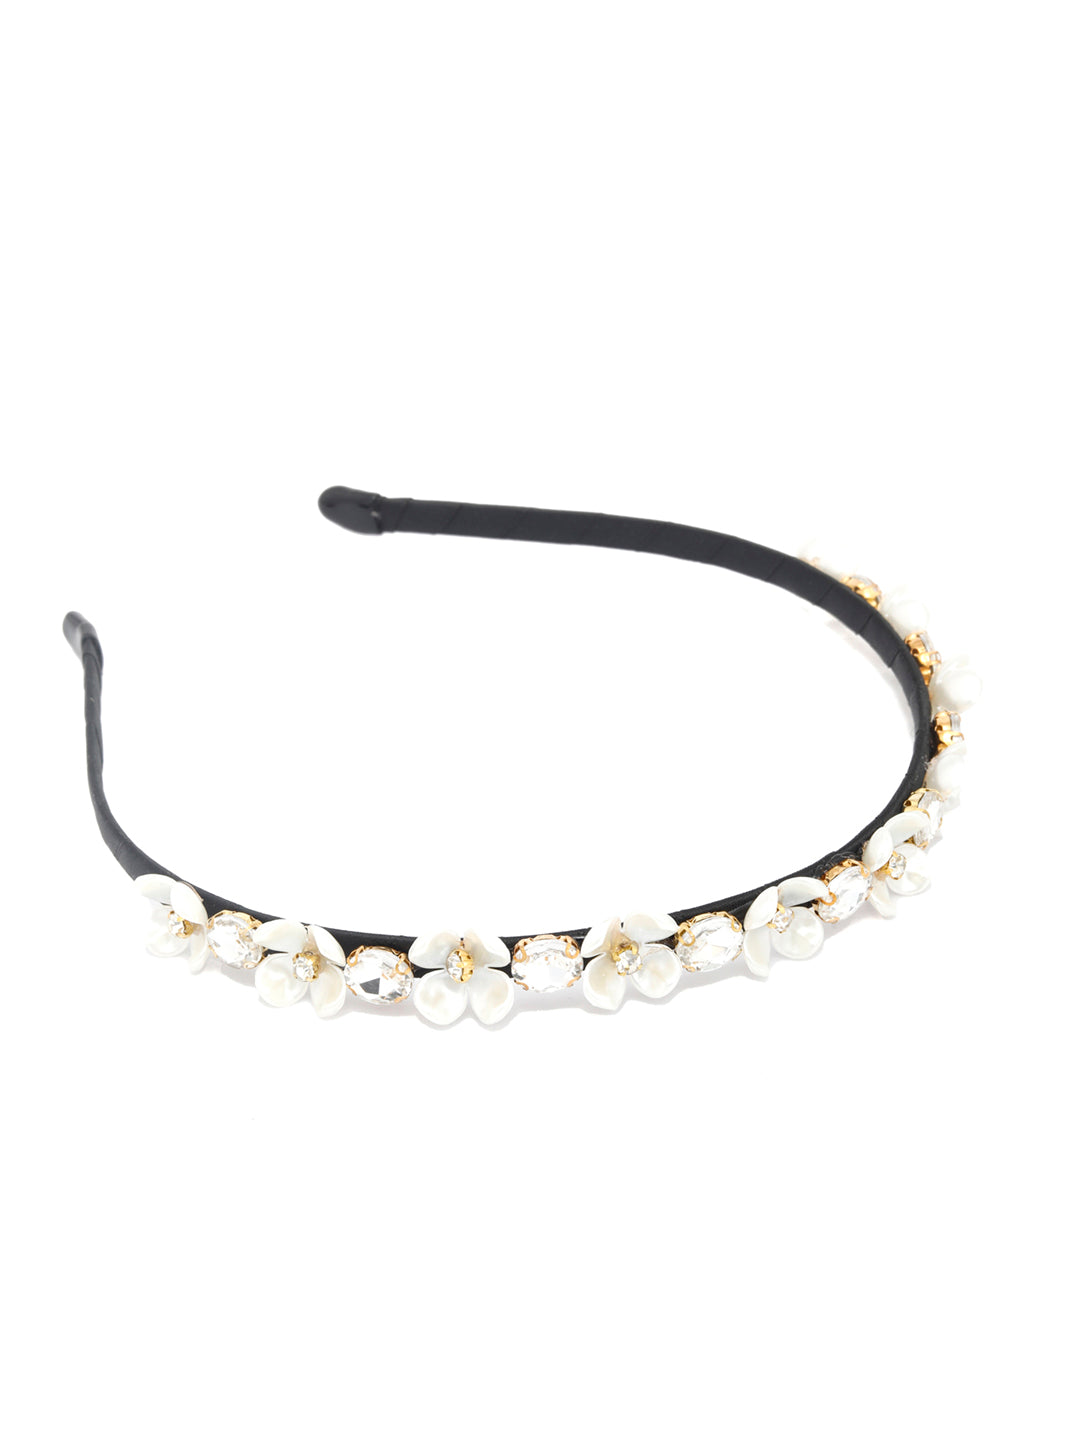 White Stones Floral Sperical Hair Band